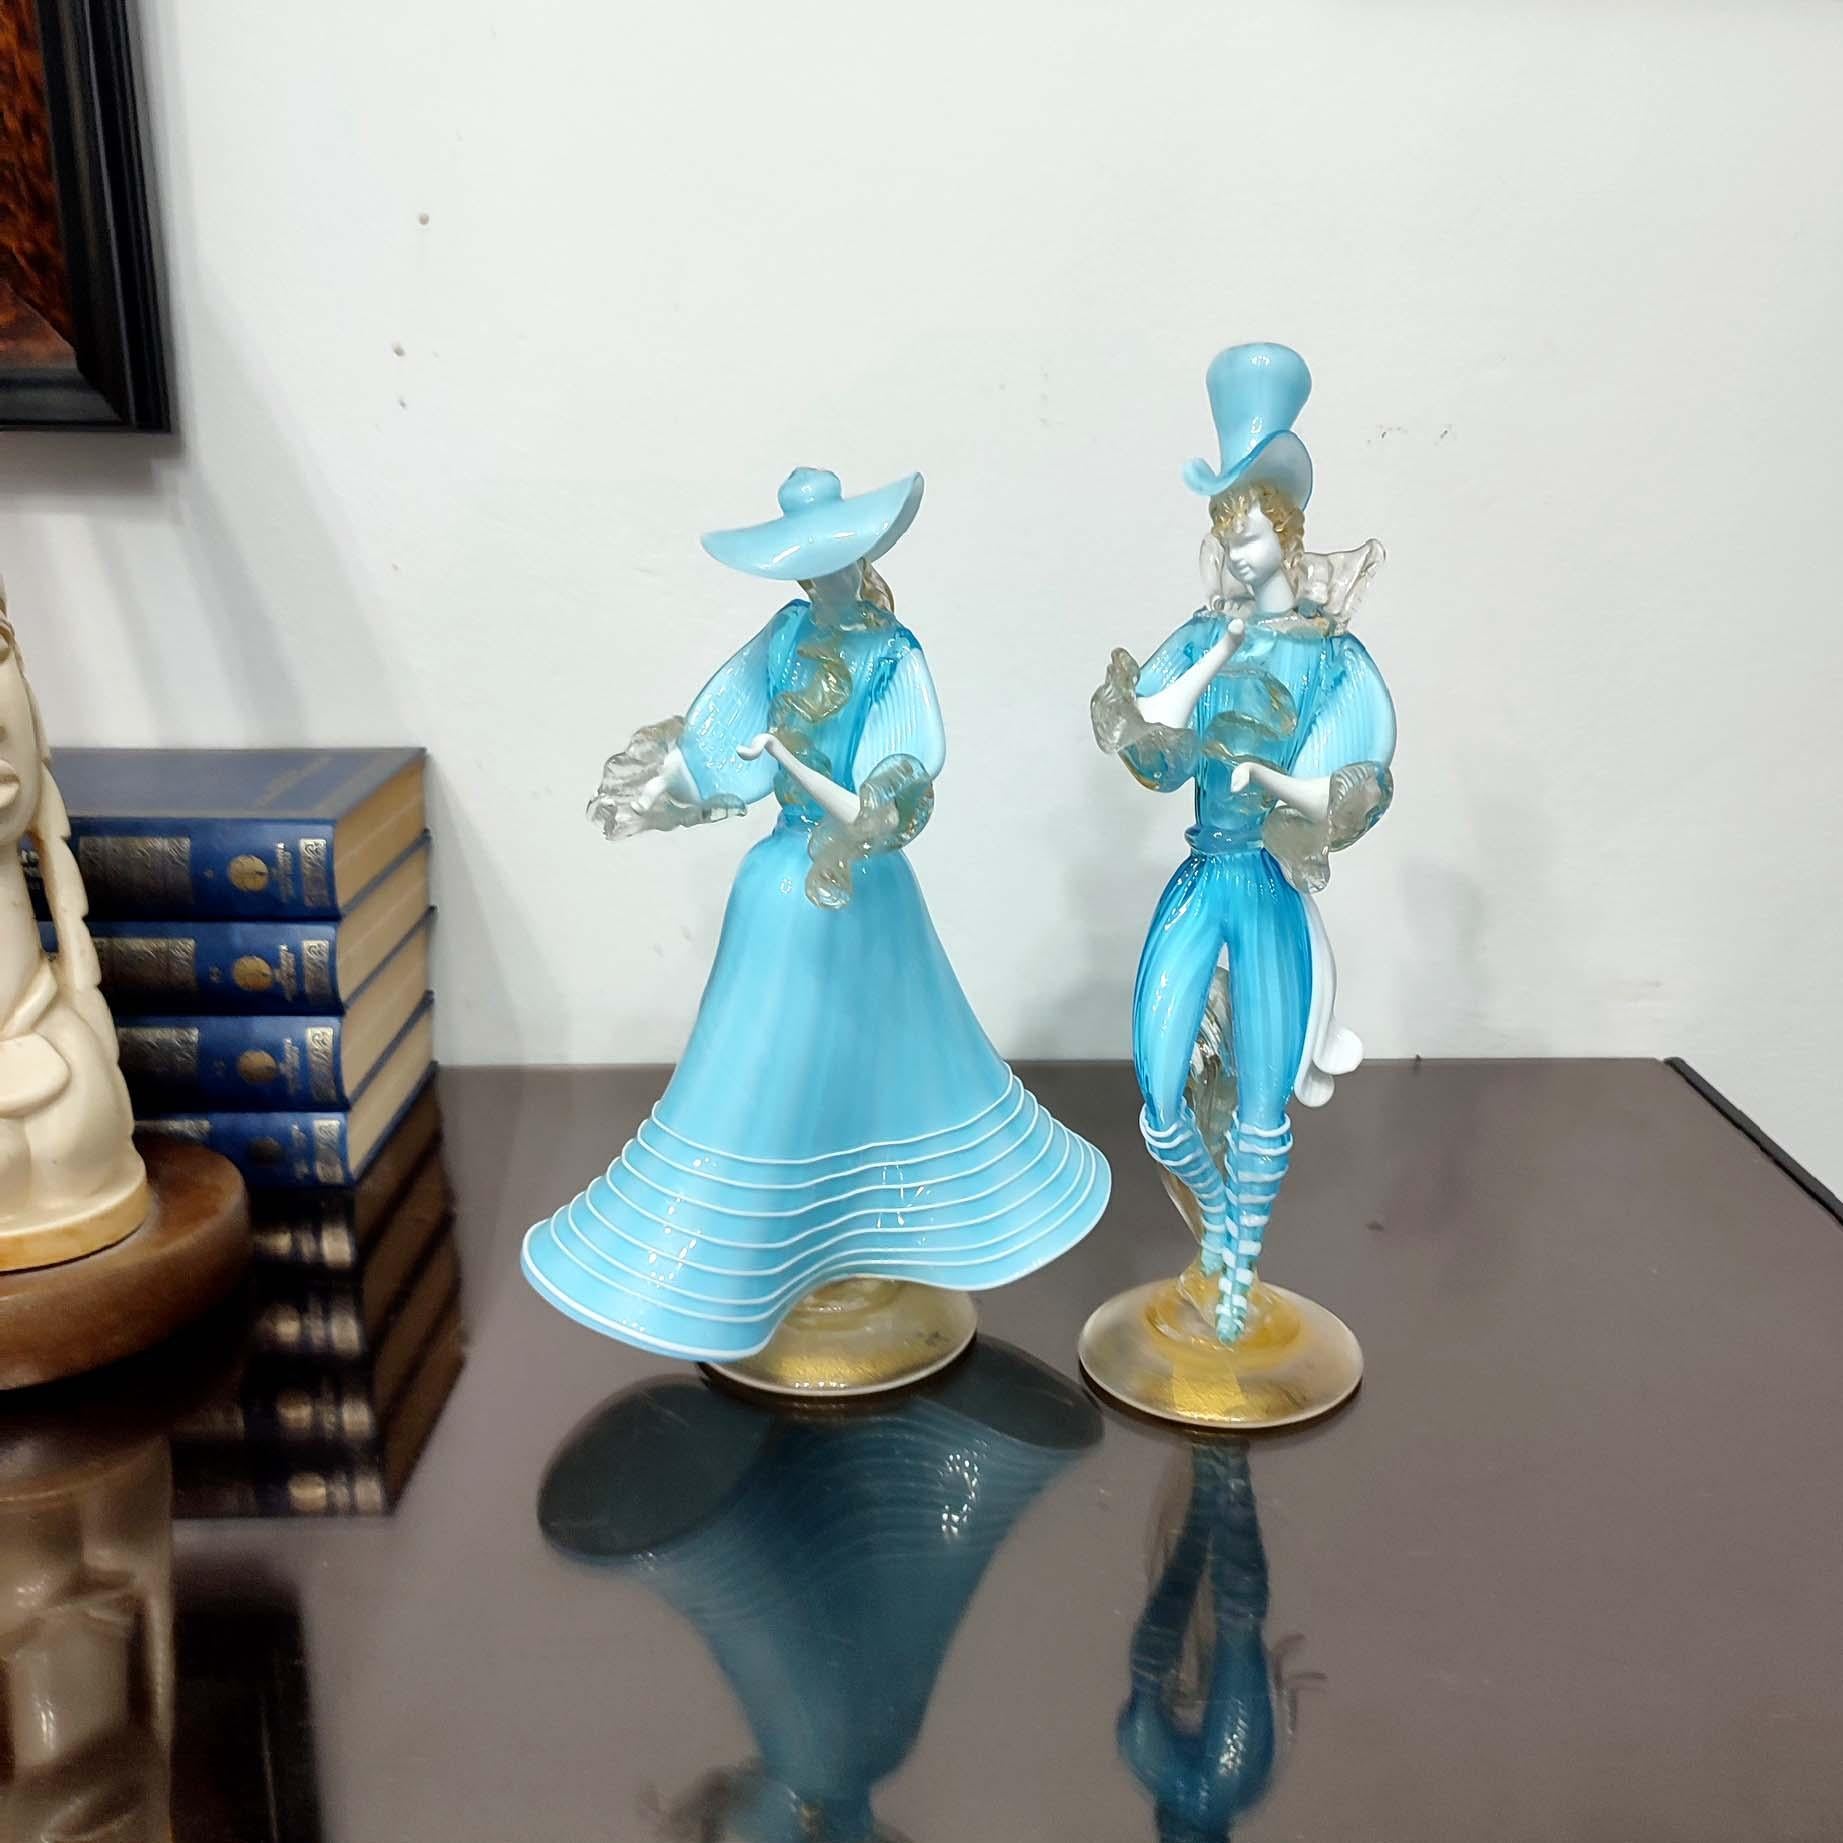 Beautiful vintage glass sculptures of a Venetian couple, entirely handmade using several traditional Venetian glass techniques.
An exquisite couple in a dancing posture, perfectly proportioned. The light blue tone, detailed faces, and the dance